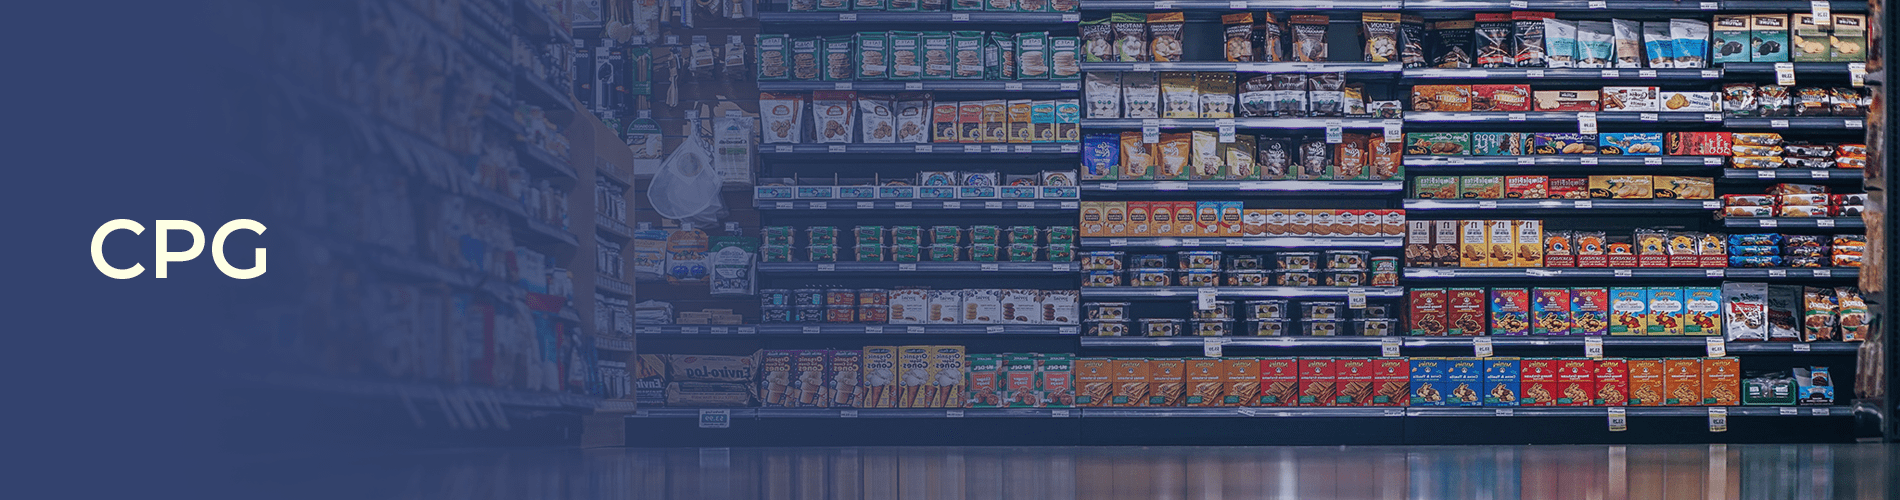 Industry 4. 0 for Consumer Packaged Goods